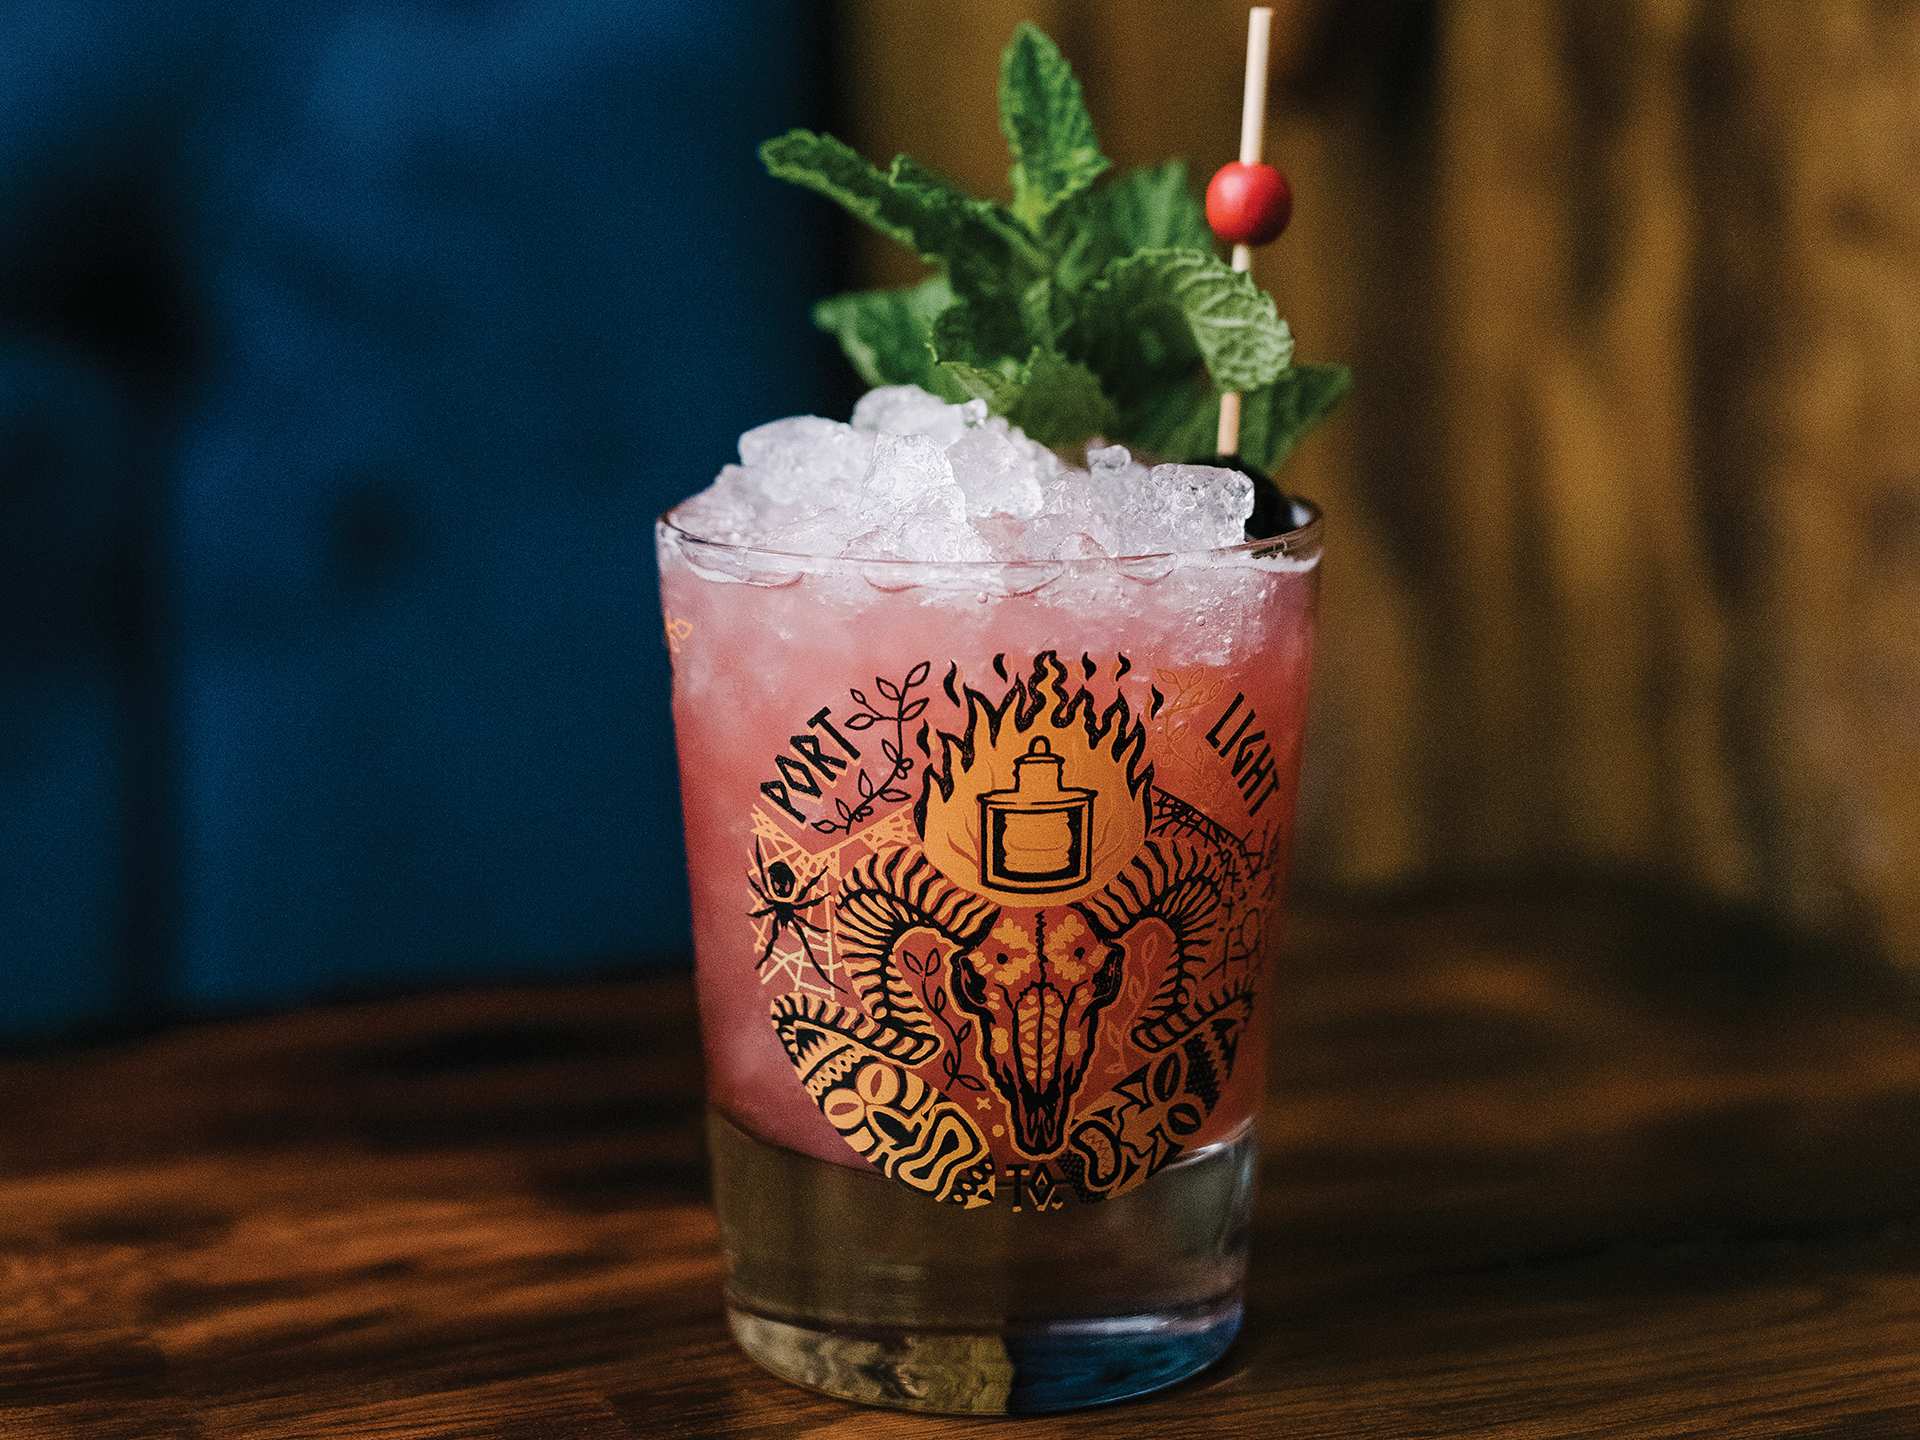 Tropical cocktail recipes from Port Light on Bloor | The Port Light cocktail